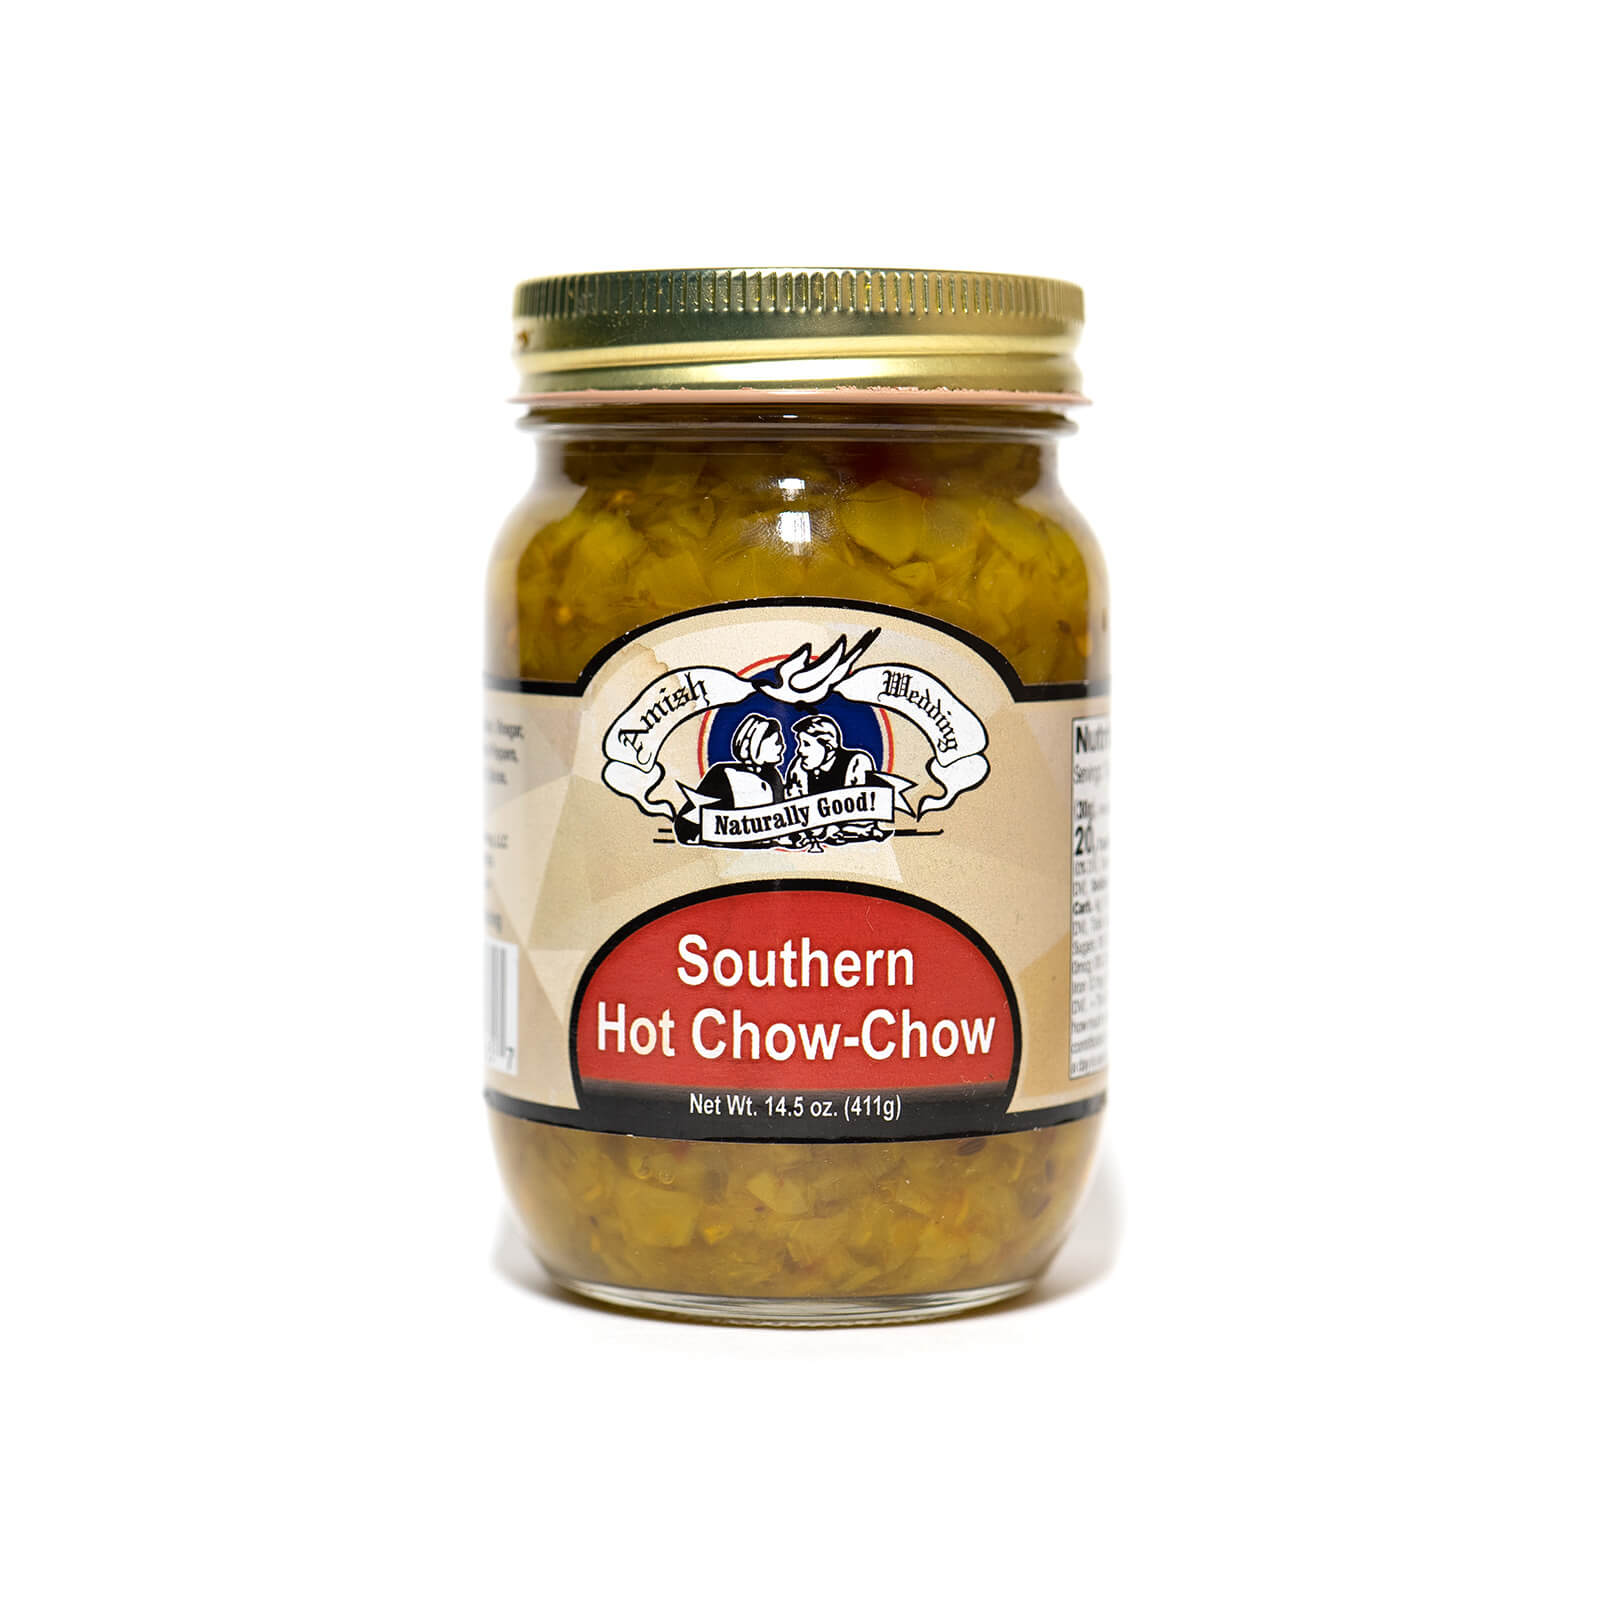 Southern Hot Chow Chow - Amish Wedding - Single Jar - Front Label